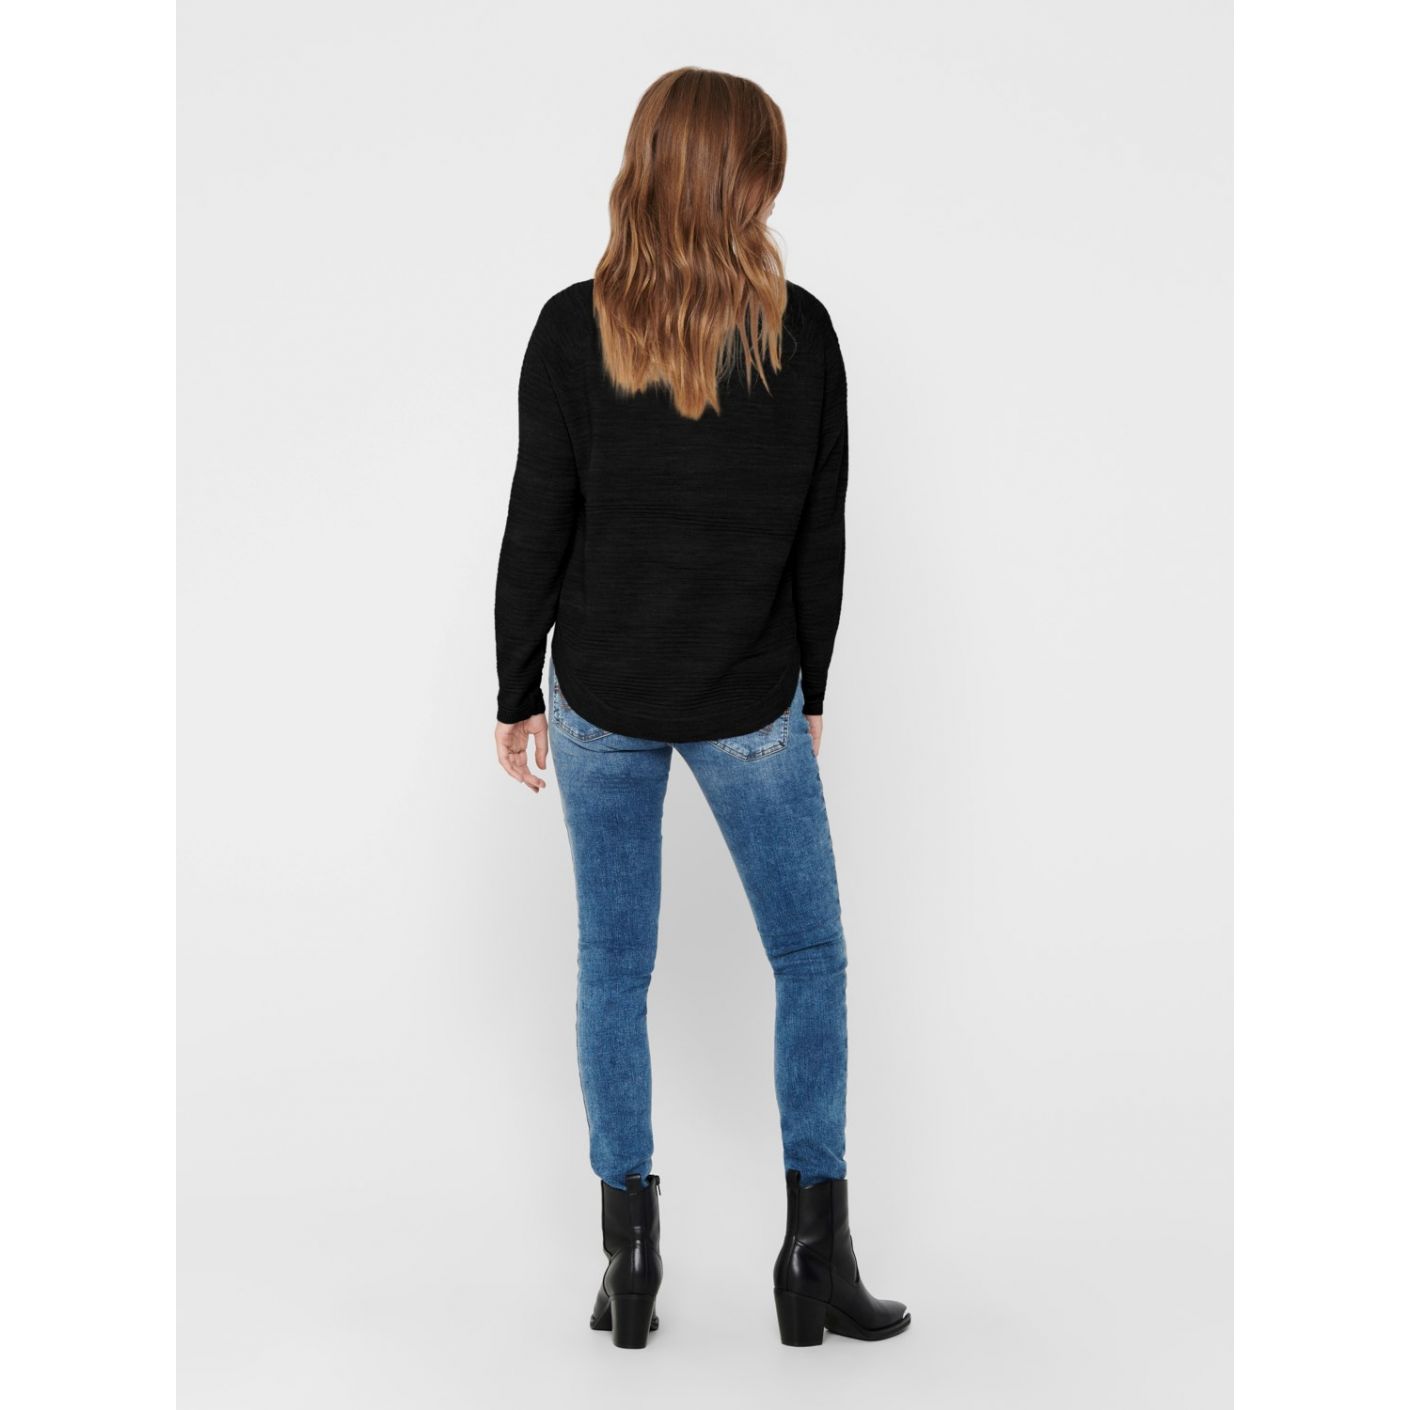 Only - Pullover caviar ls noos knit #blk 15141866